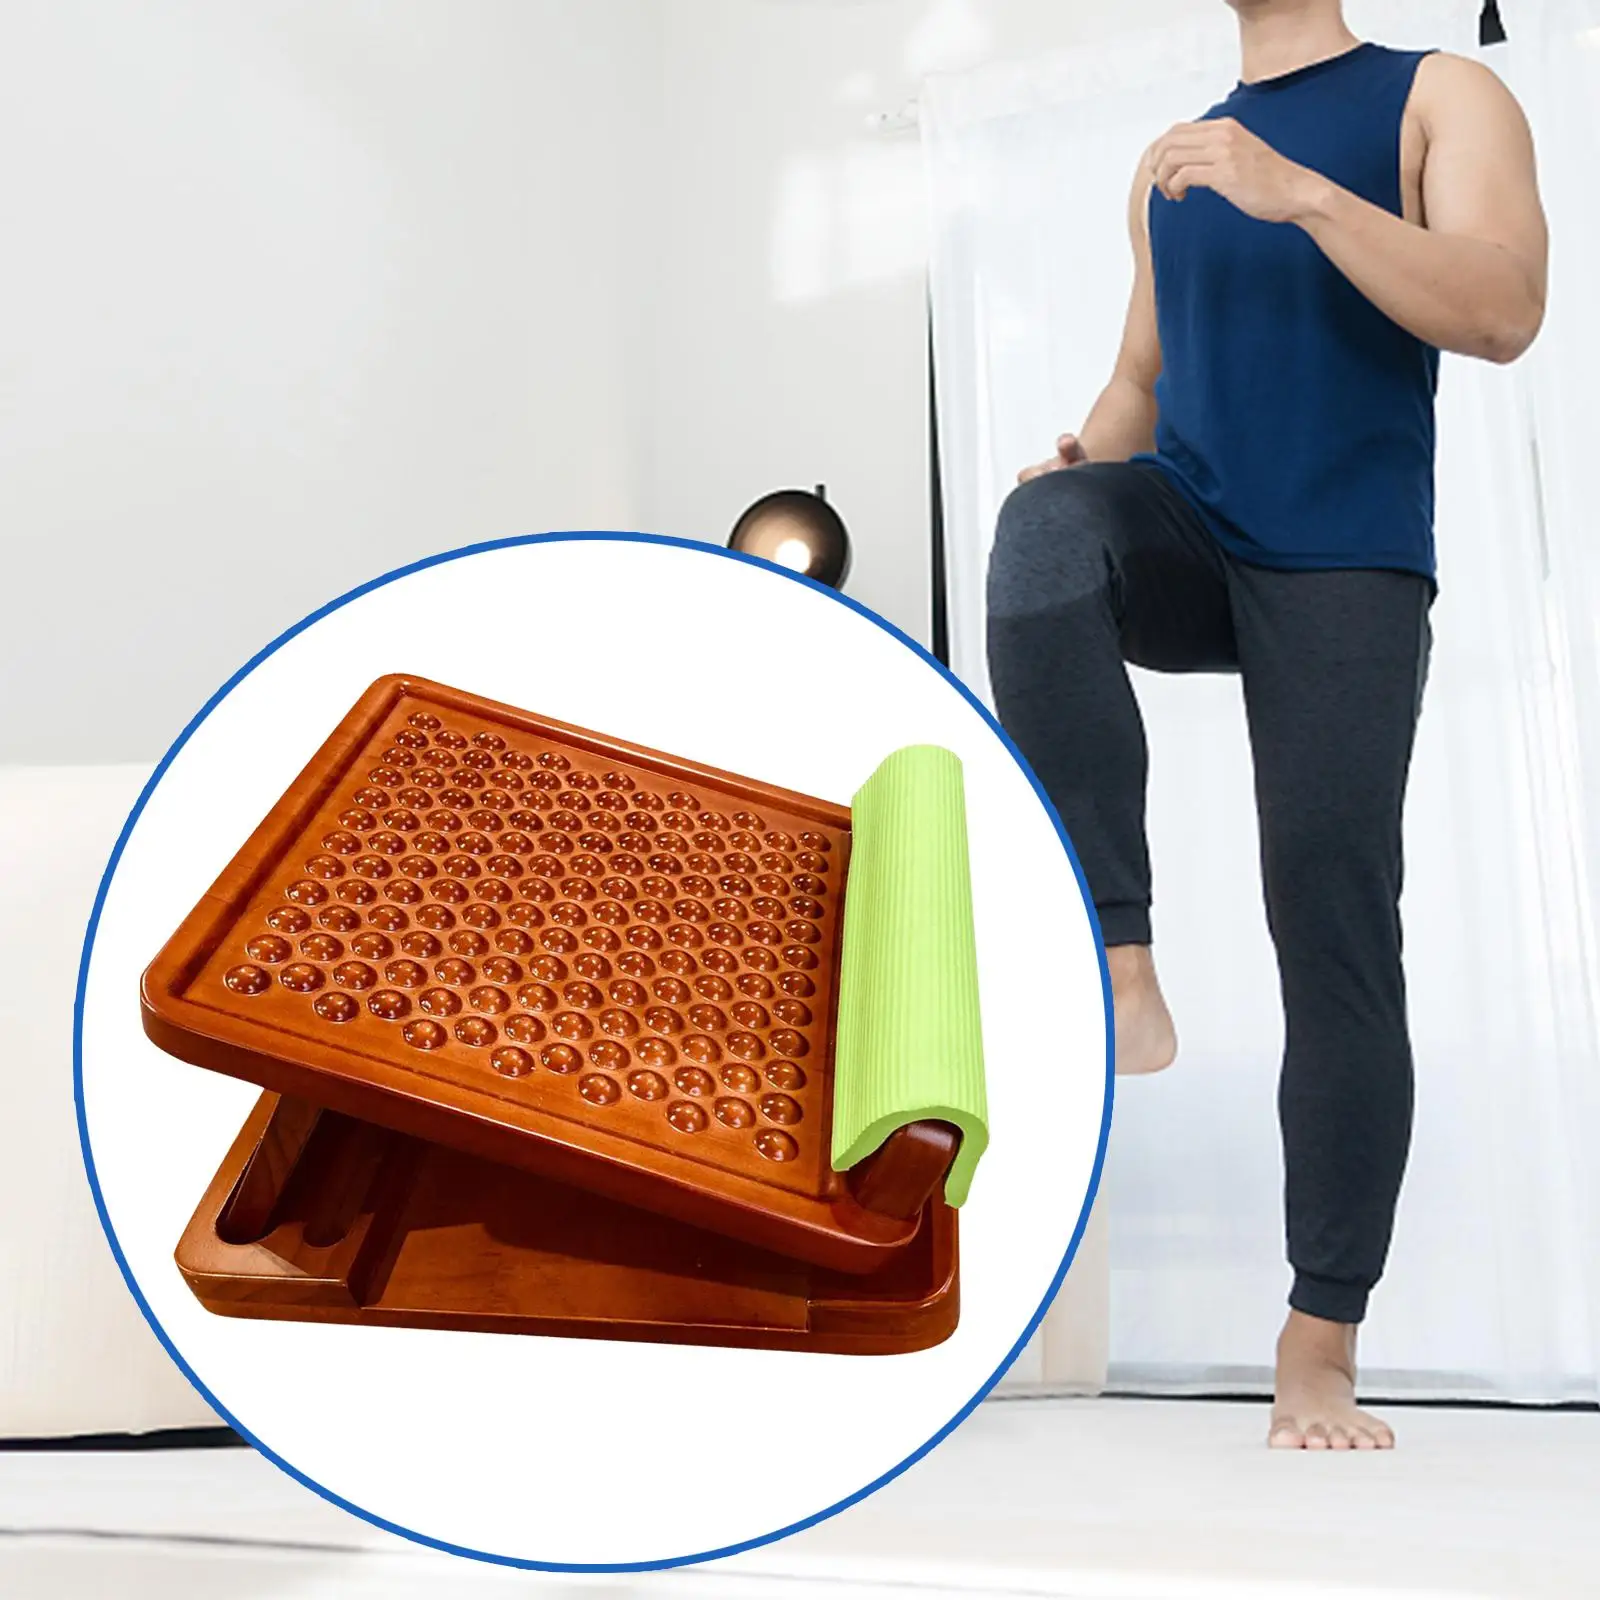 Solid Wood Slant Board Anti Slip Calf Stretcher Wood Incline Board for Ankle Exercise Training Equipment Home Gym